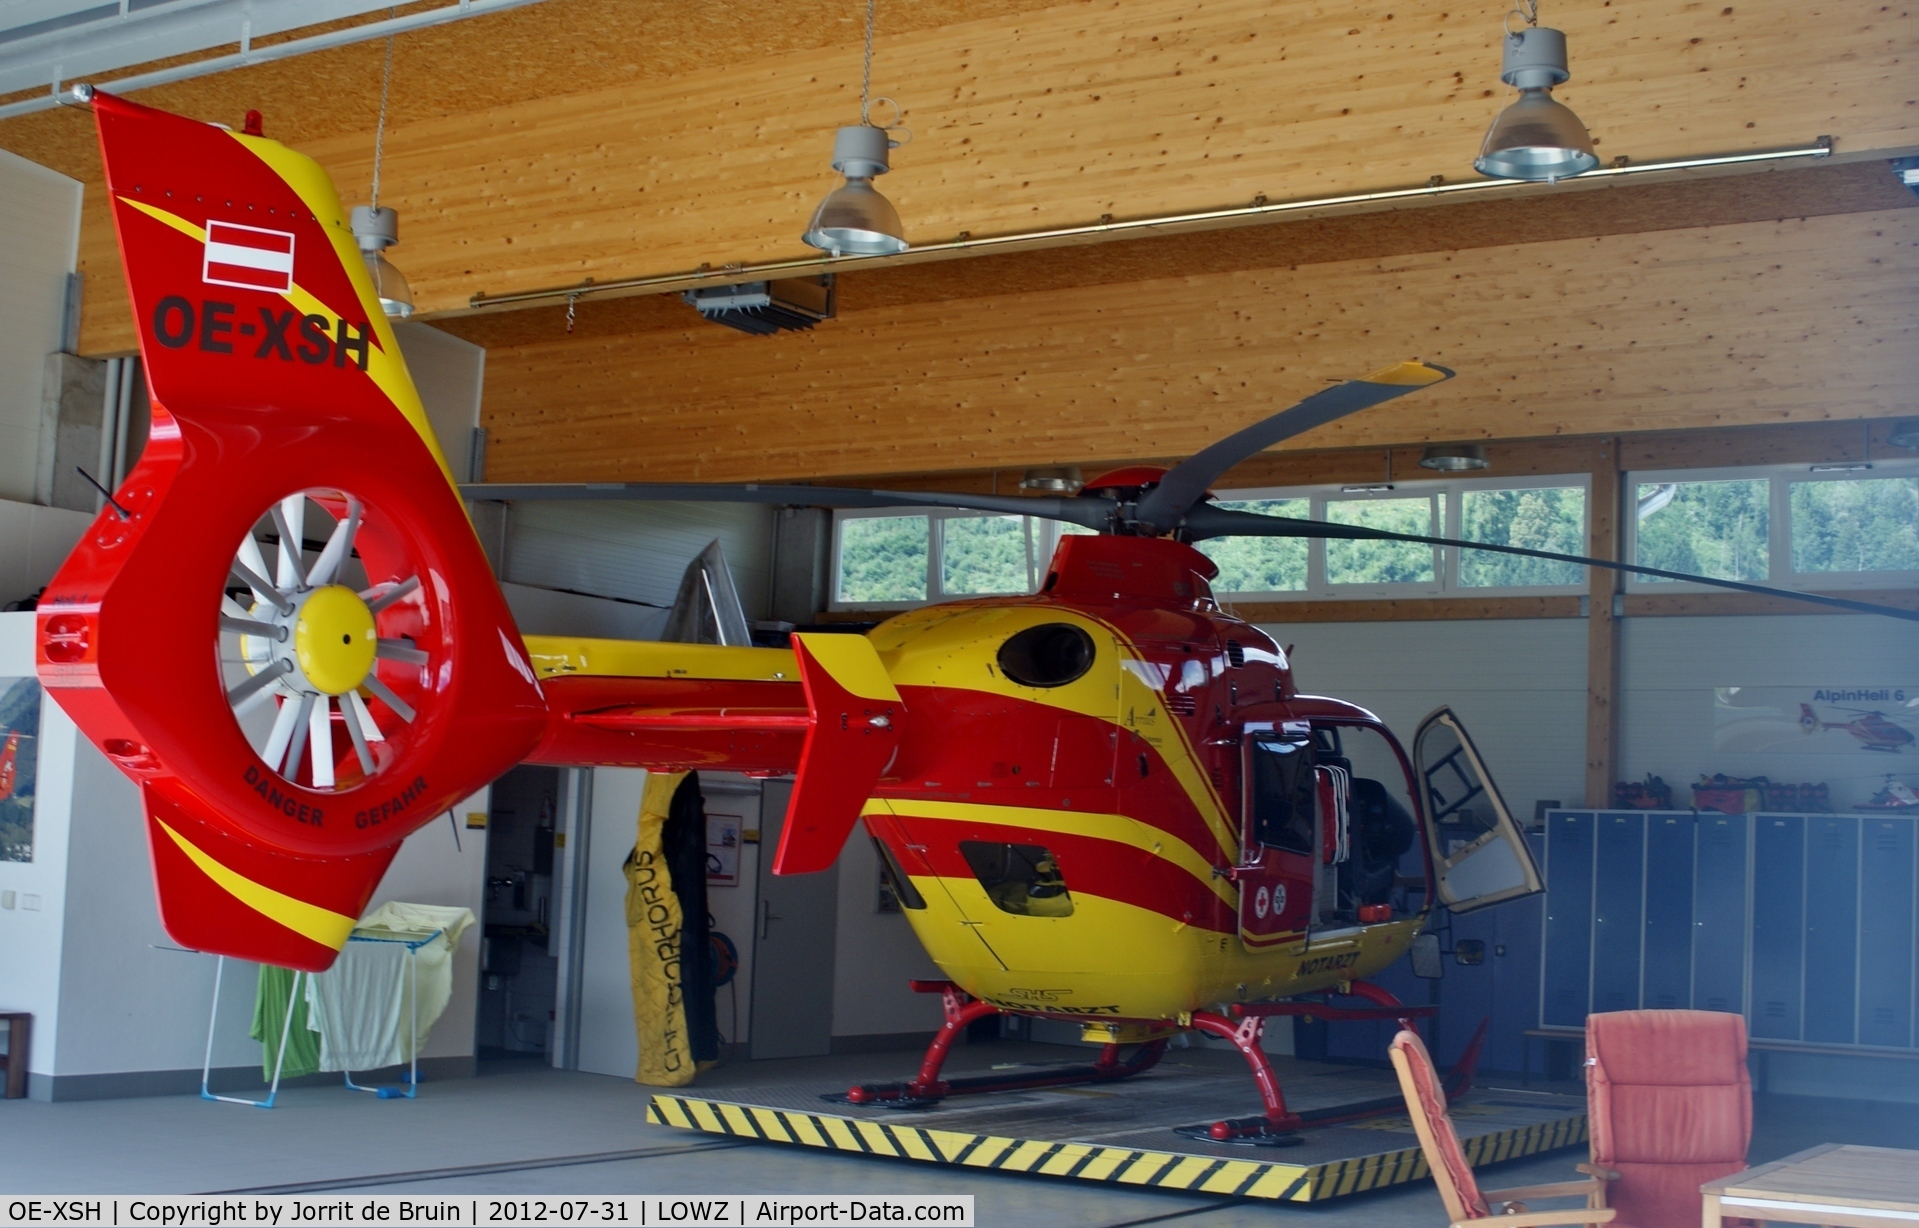 OE-XSH, 1997 Eurocopter EC-135T-1 C/N 1092, The big and beautiful dragonfly, also named Alpin Heli 6, is with her doors open ready to be pulled out of the hangar.